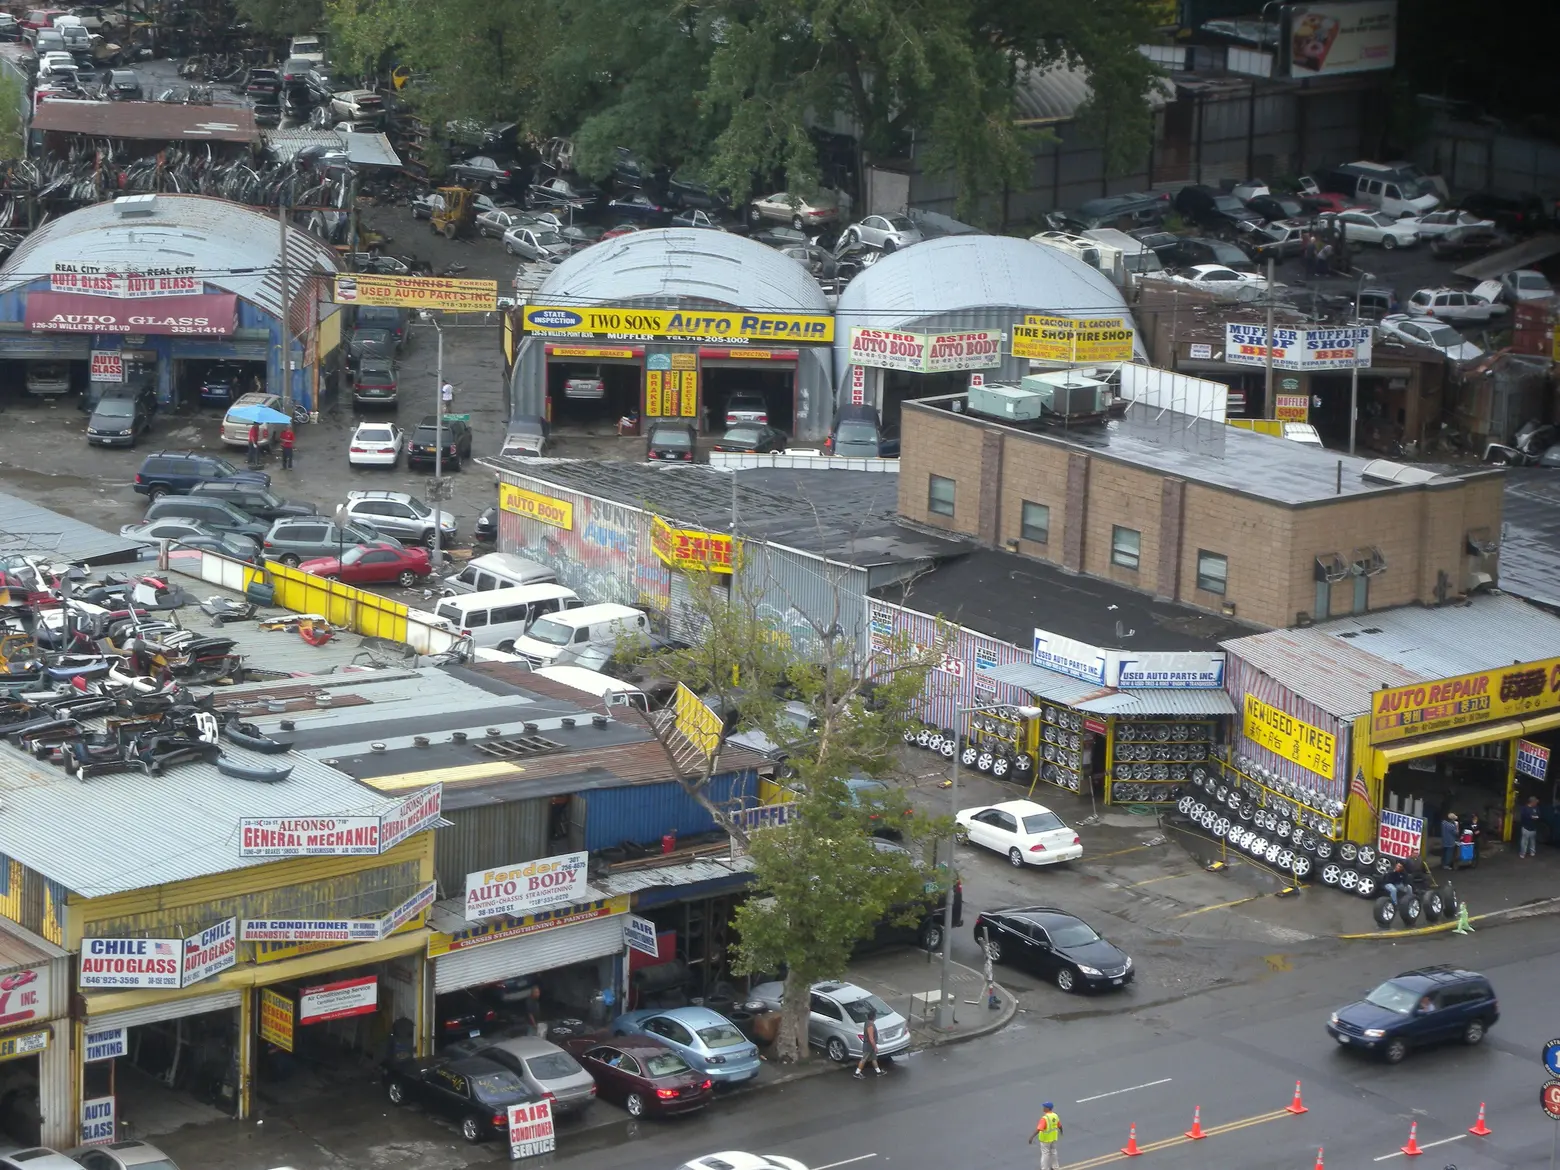 Could affordable housing plans for Willets Point be scrapped for airport construction parking?